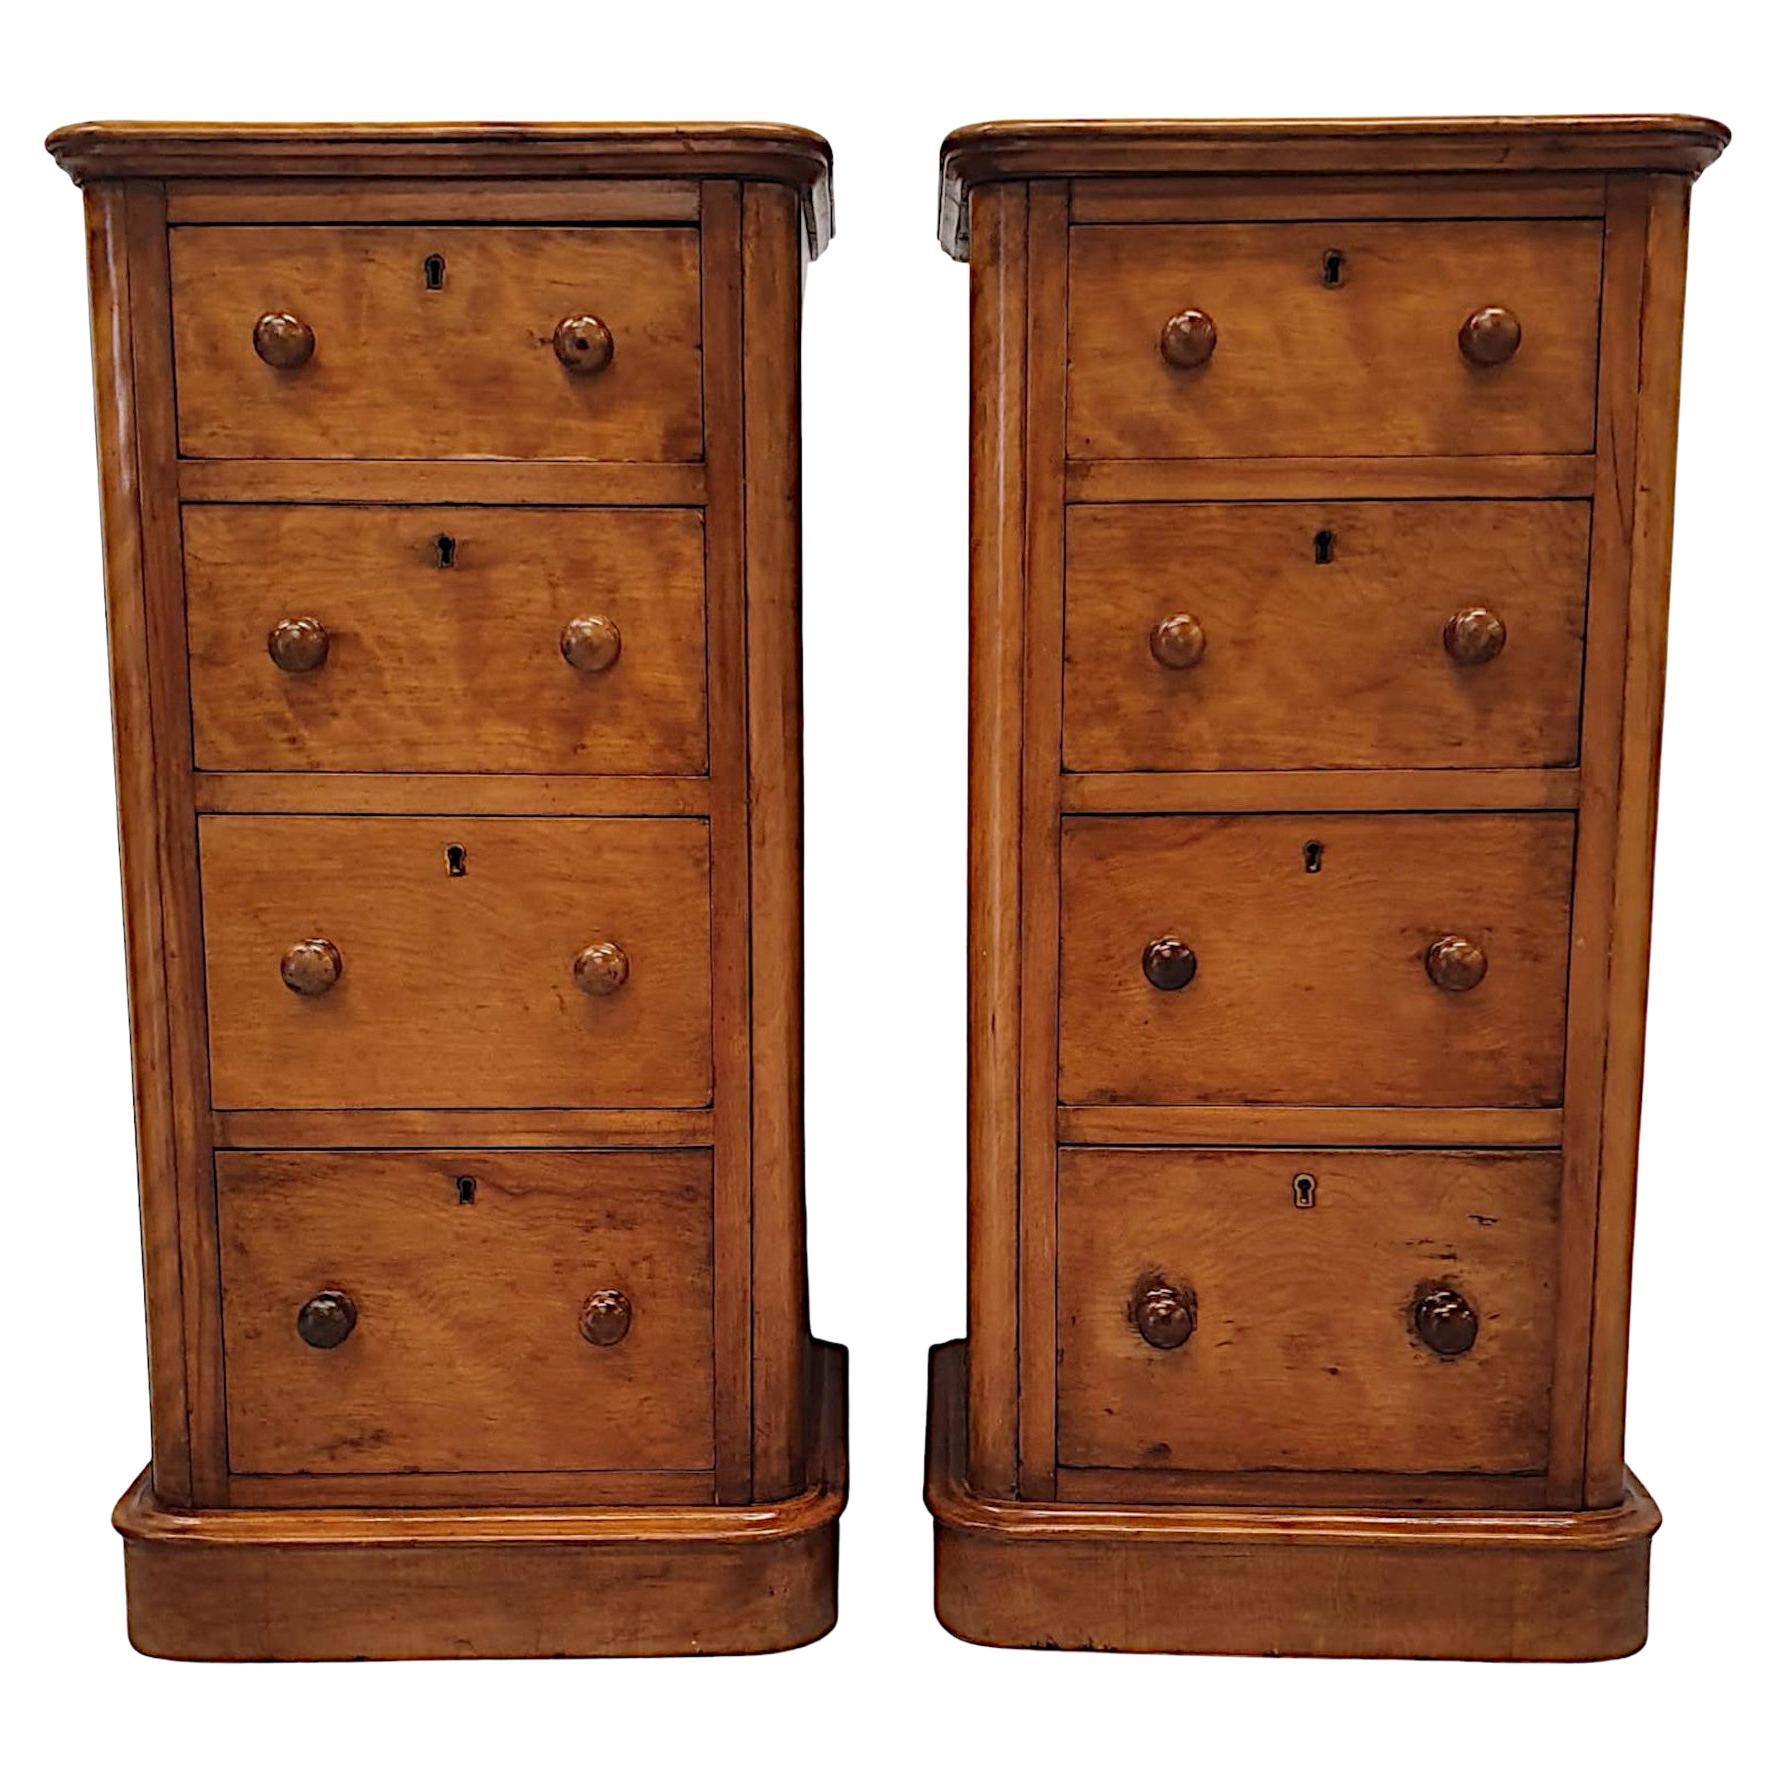 Gorgeous Pair of 19th Century Bedside Chests